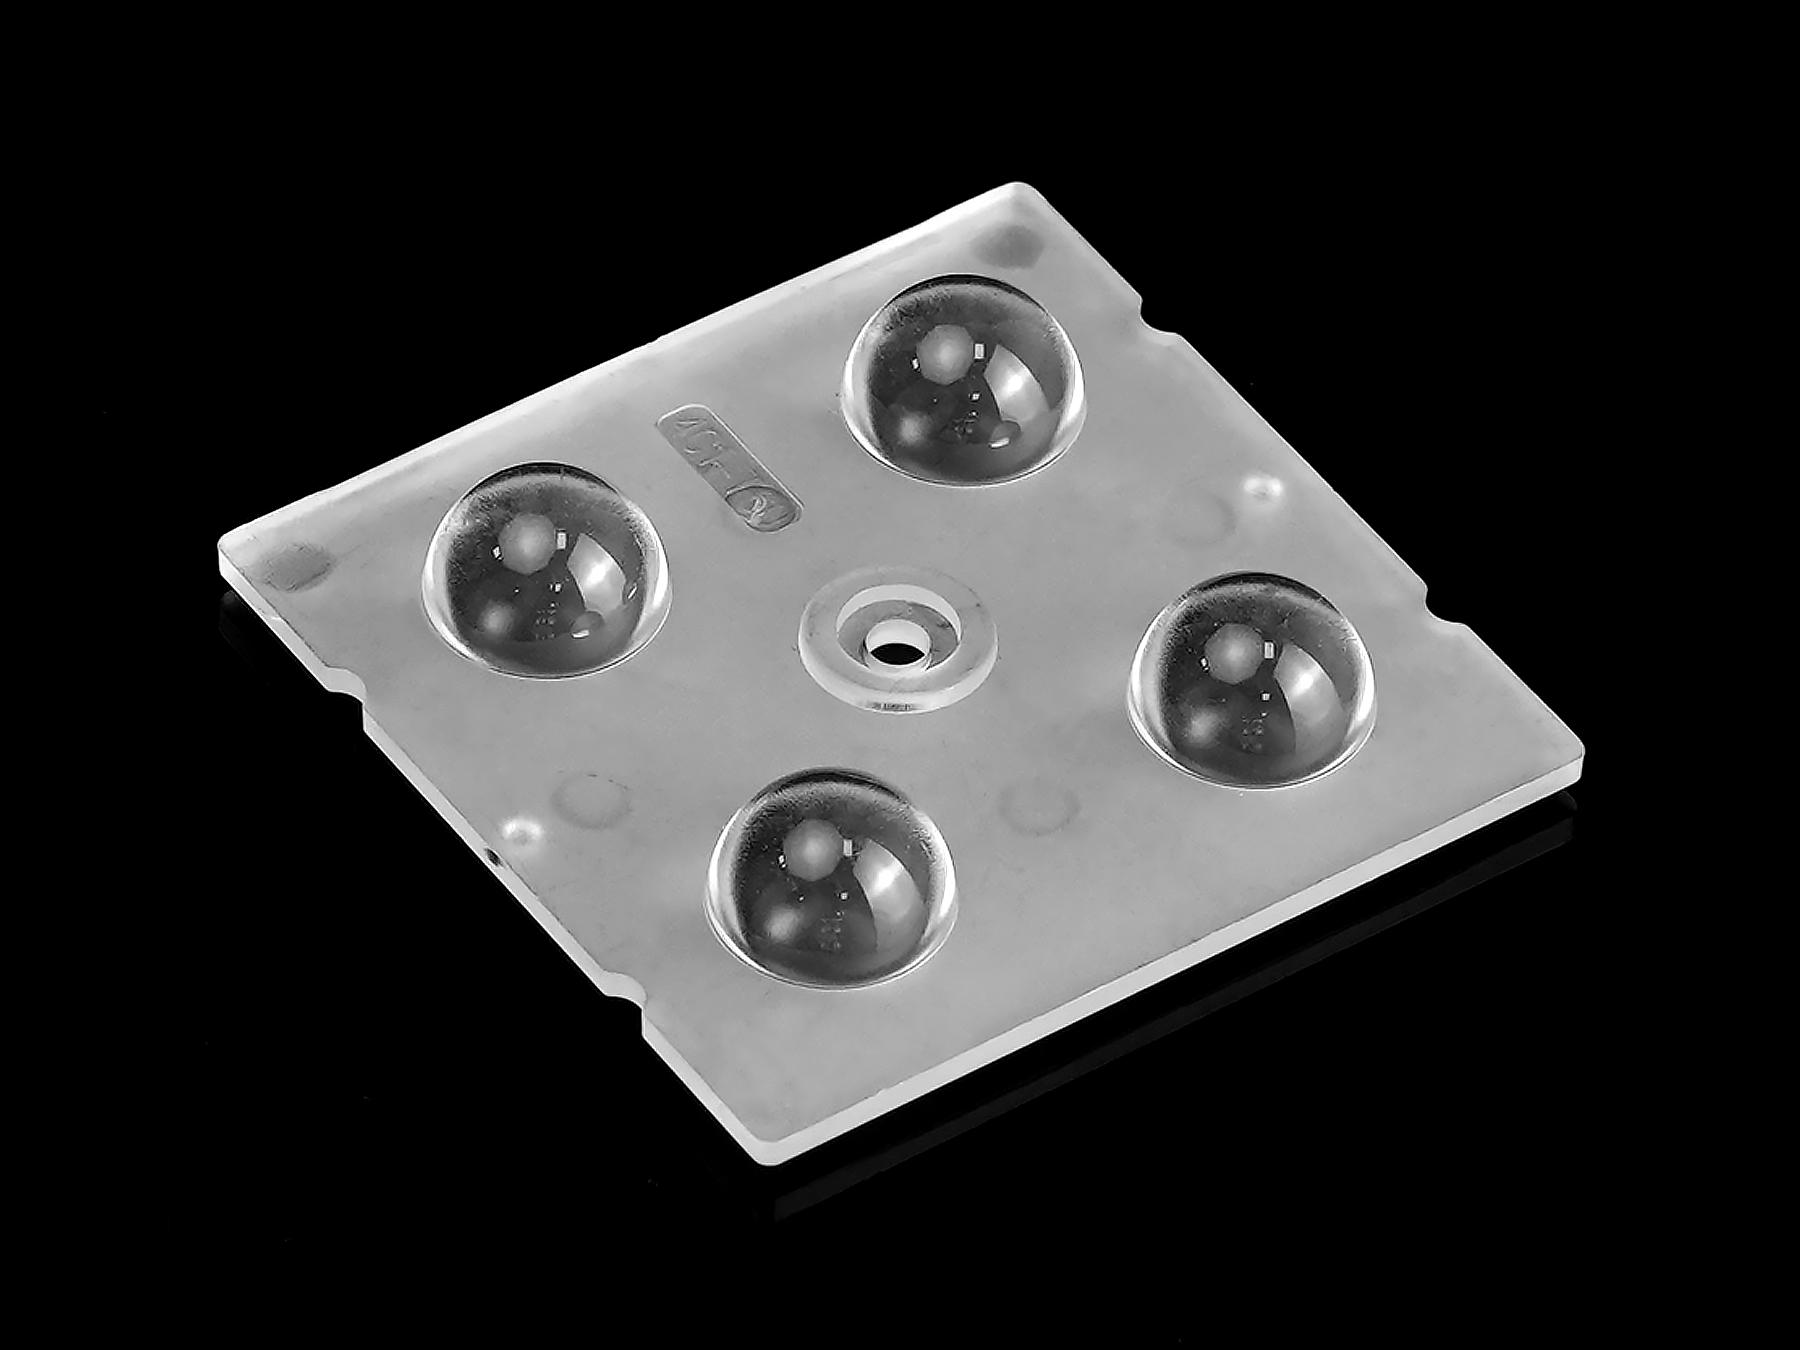 2x2 lens compatible with "3535" and "5050" LEDs 60°